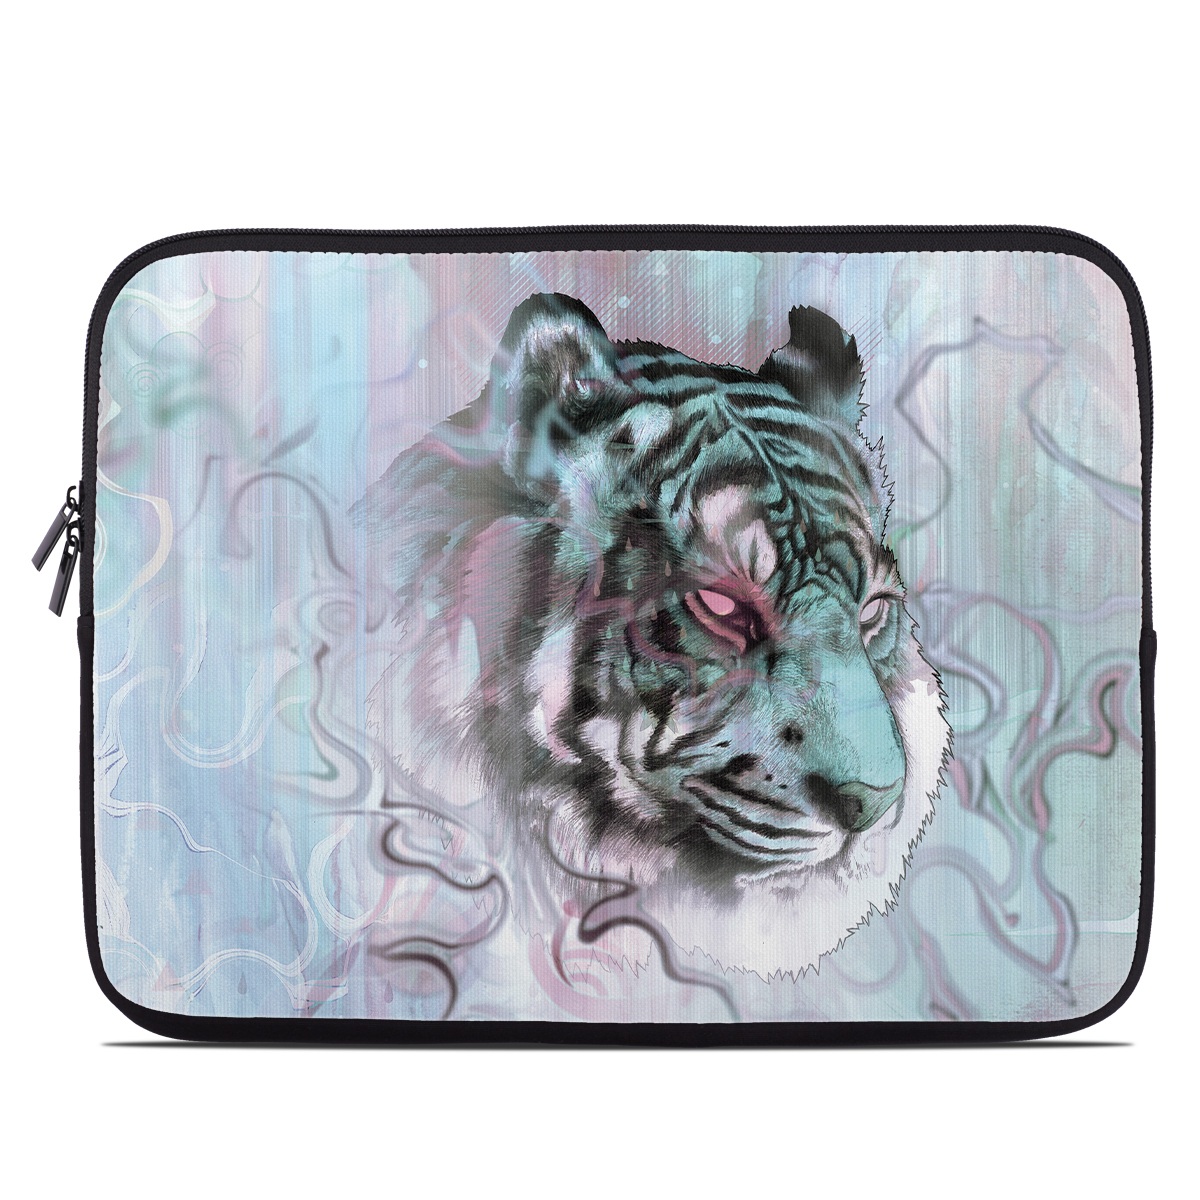 Laptop Sleeve - Illusive by Nature (Image 1)